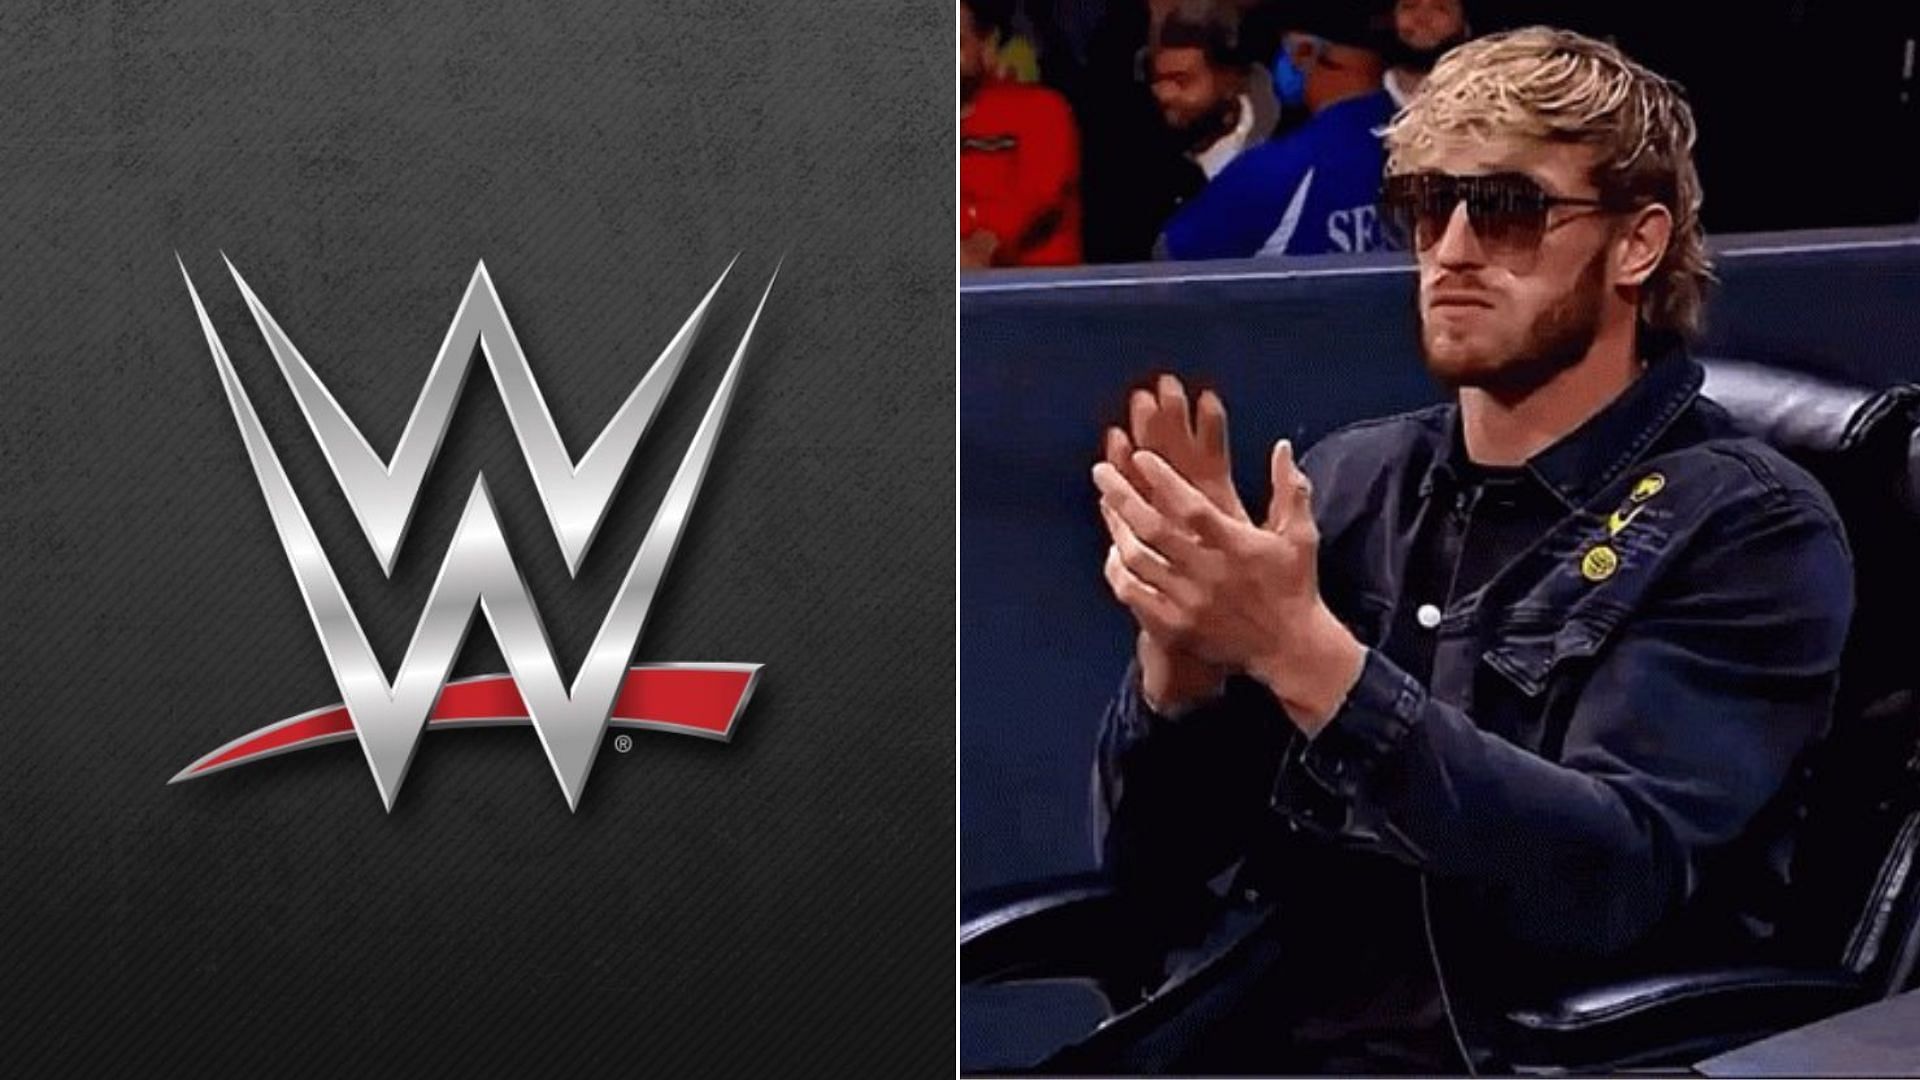 Logan Paul has overdelivered in his WWE matches in one year